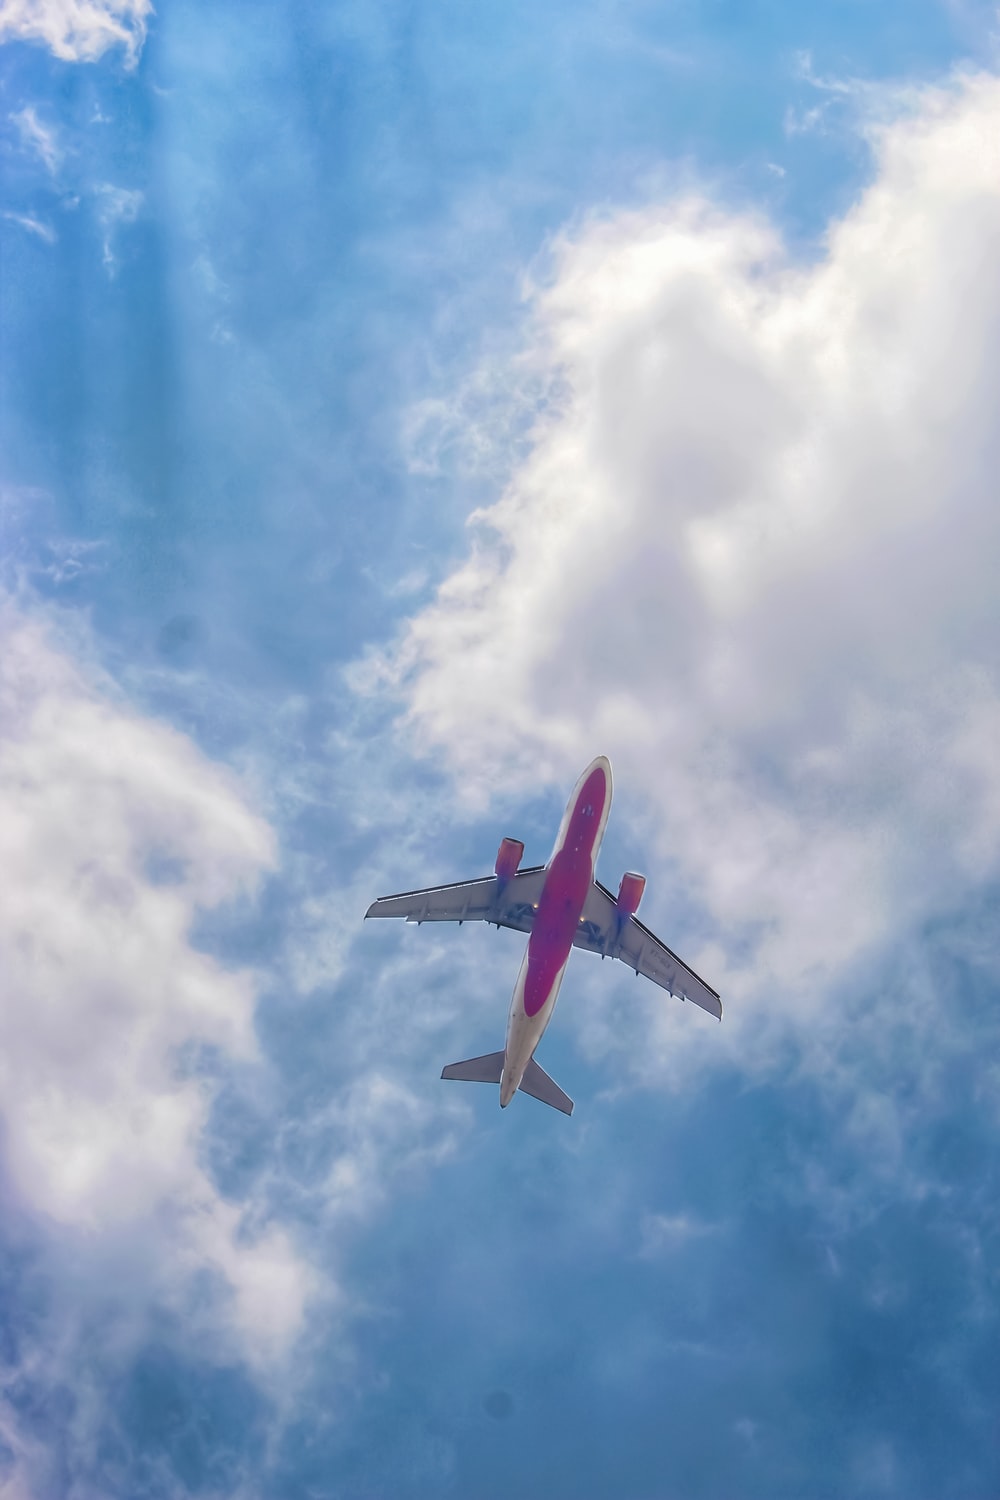 Red And White Airplane Under Blue Sky Clouds During